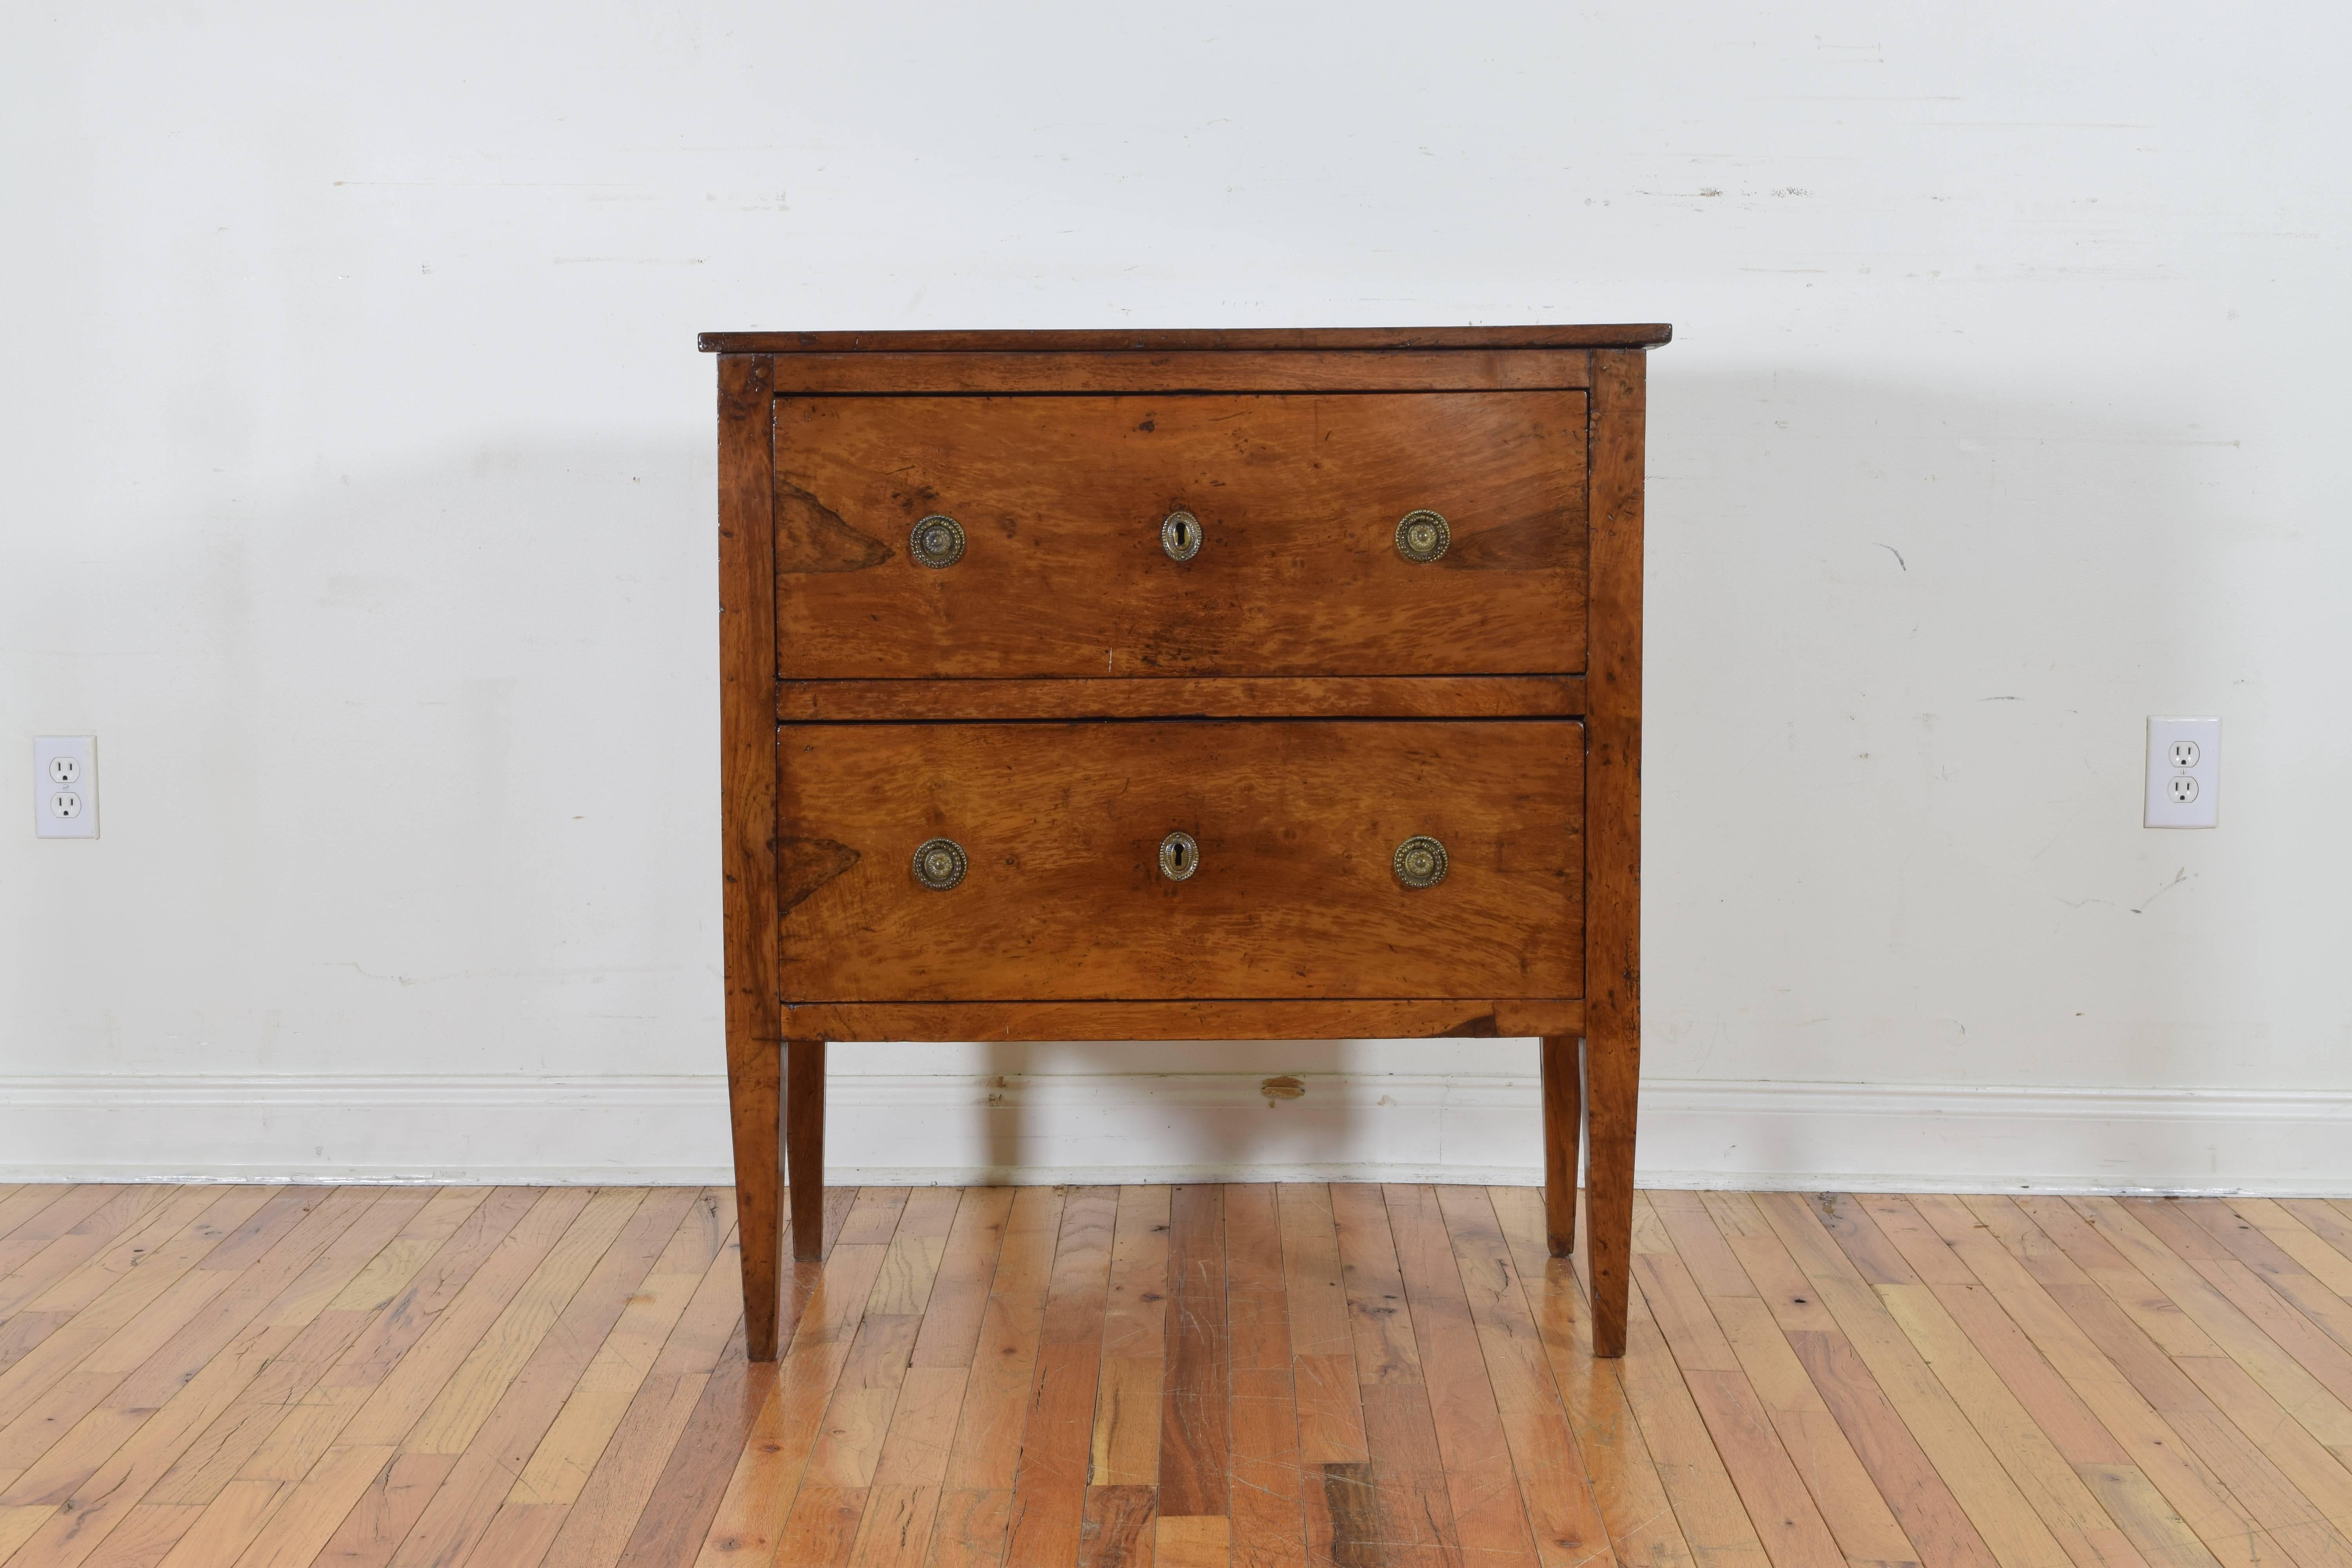 having a rectangular top above a conforming case housing two drawers, the side panels of the commode are trimmed in brass, retaining antique hardware, raised on a square tapering leg
early 19th century